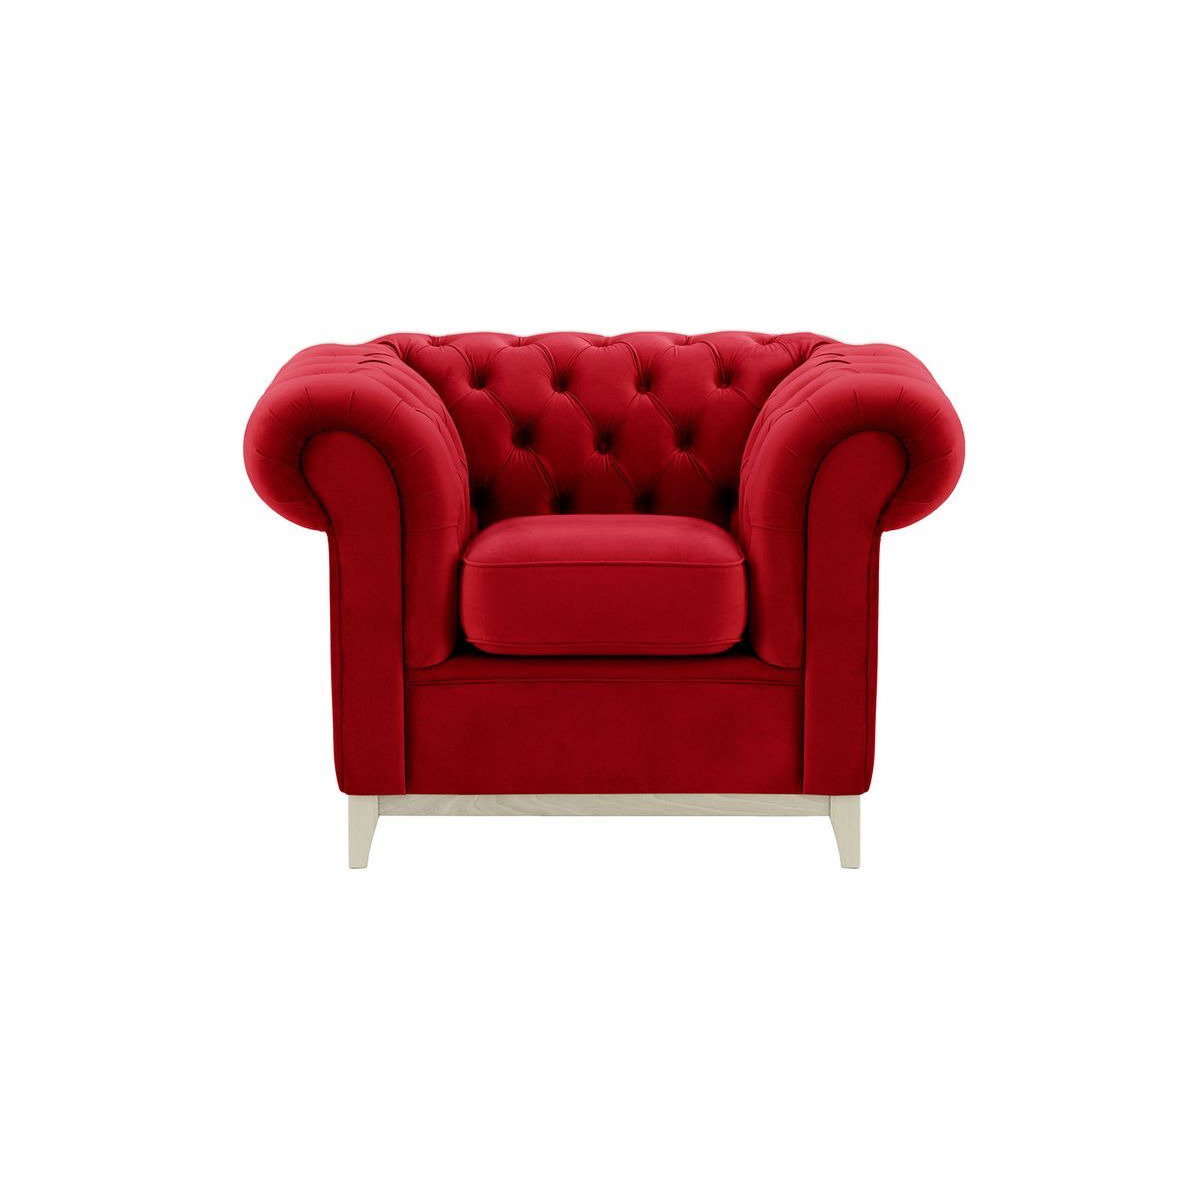 Chesterfield Wood Armchair, dark red, Leg colour: white - image 1